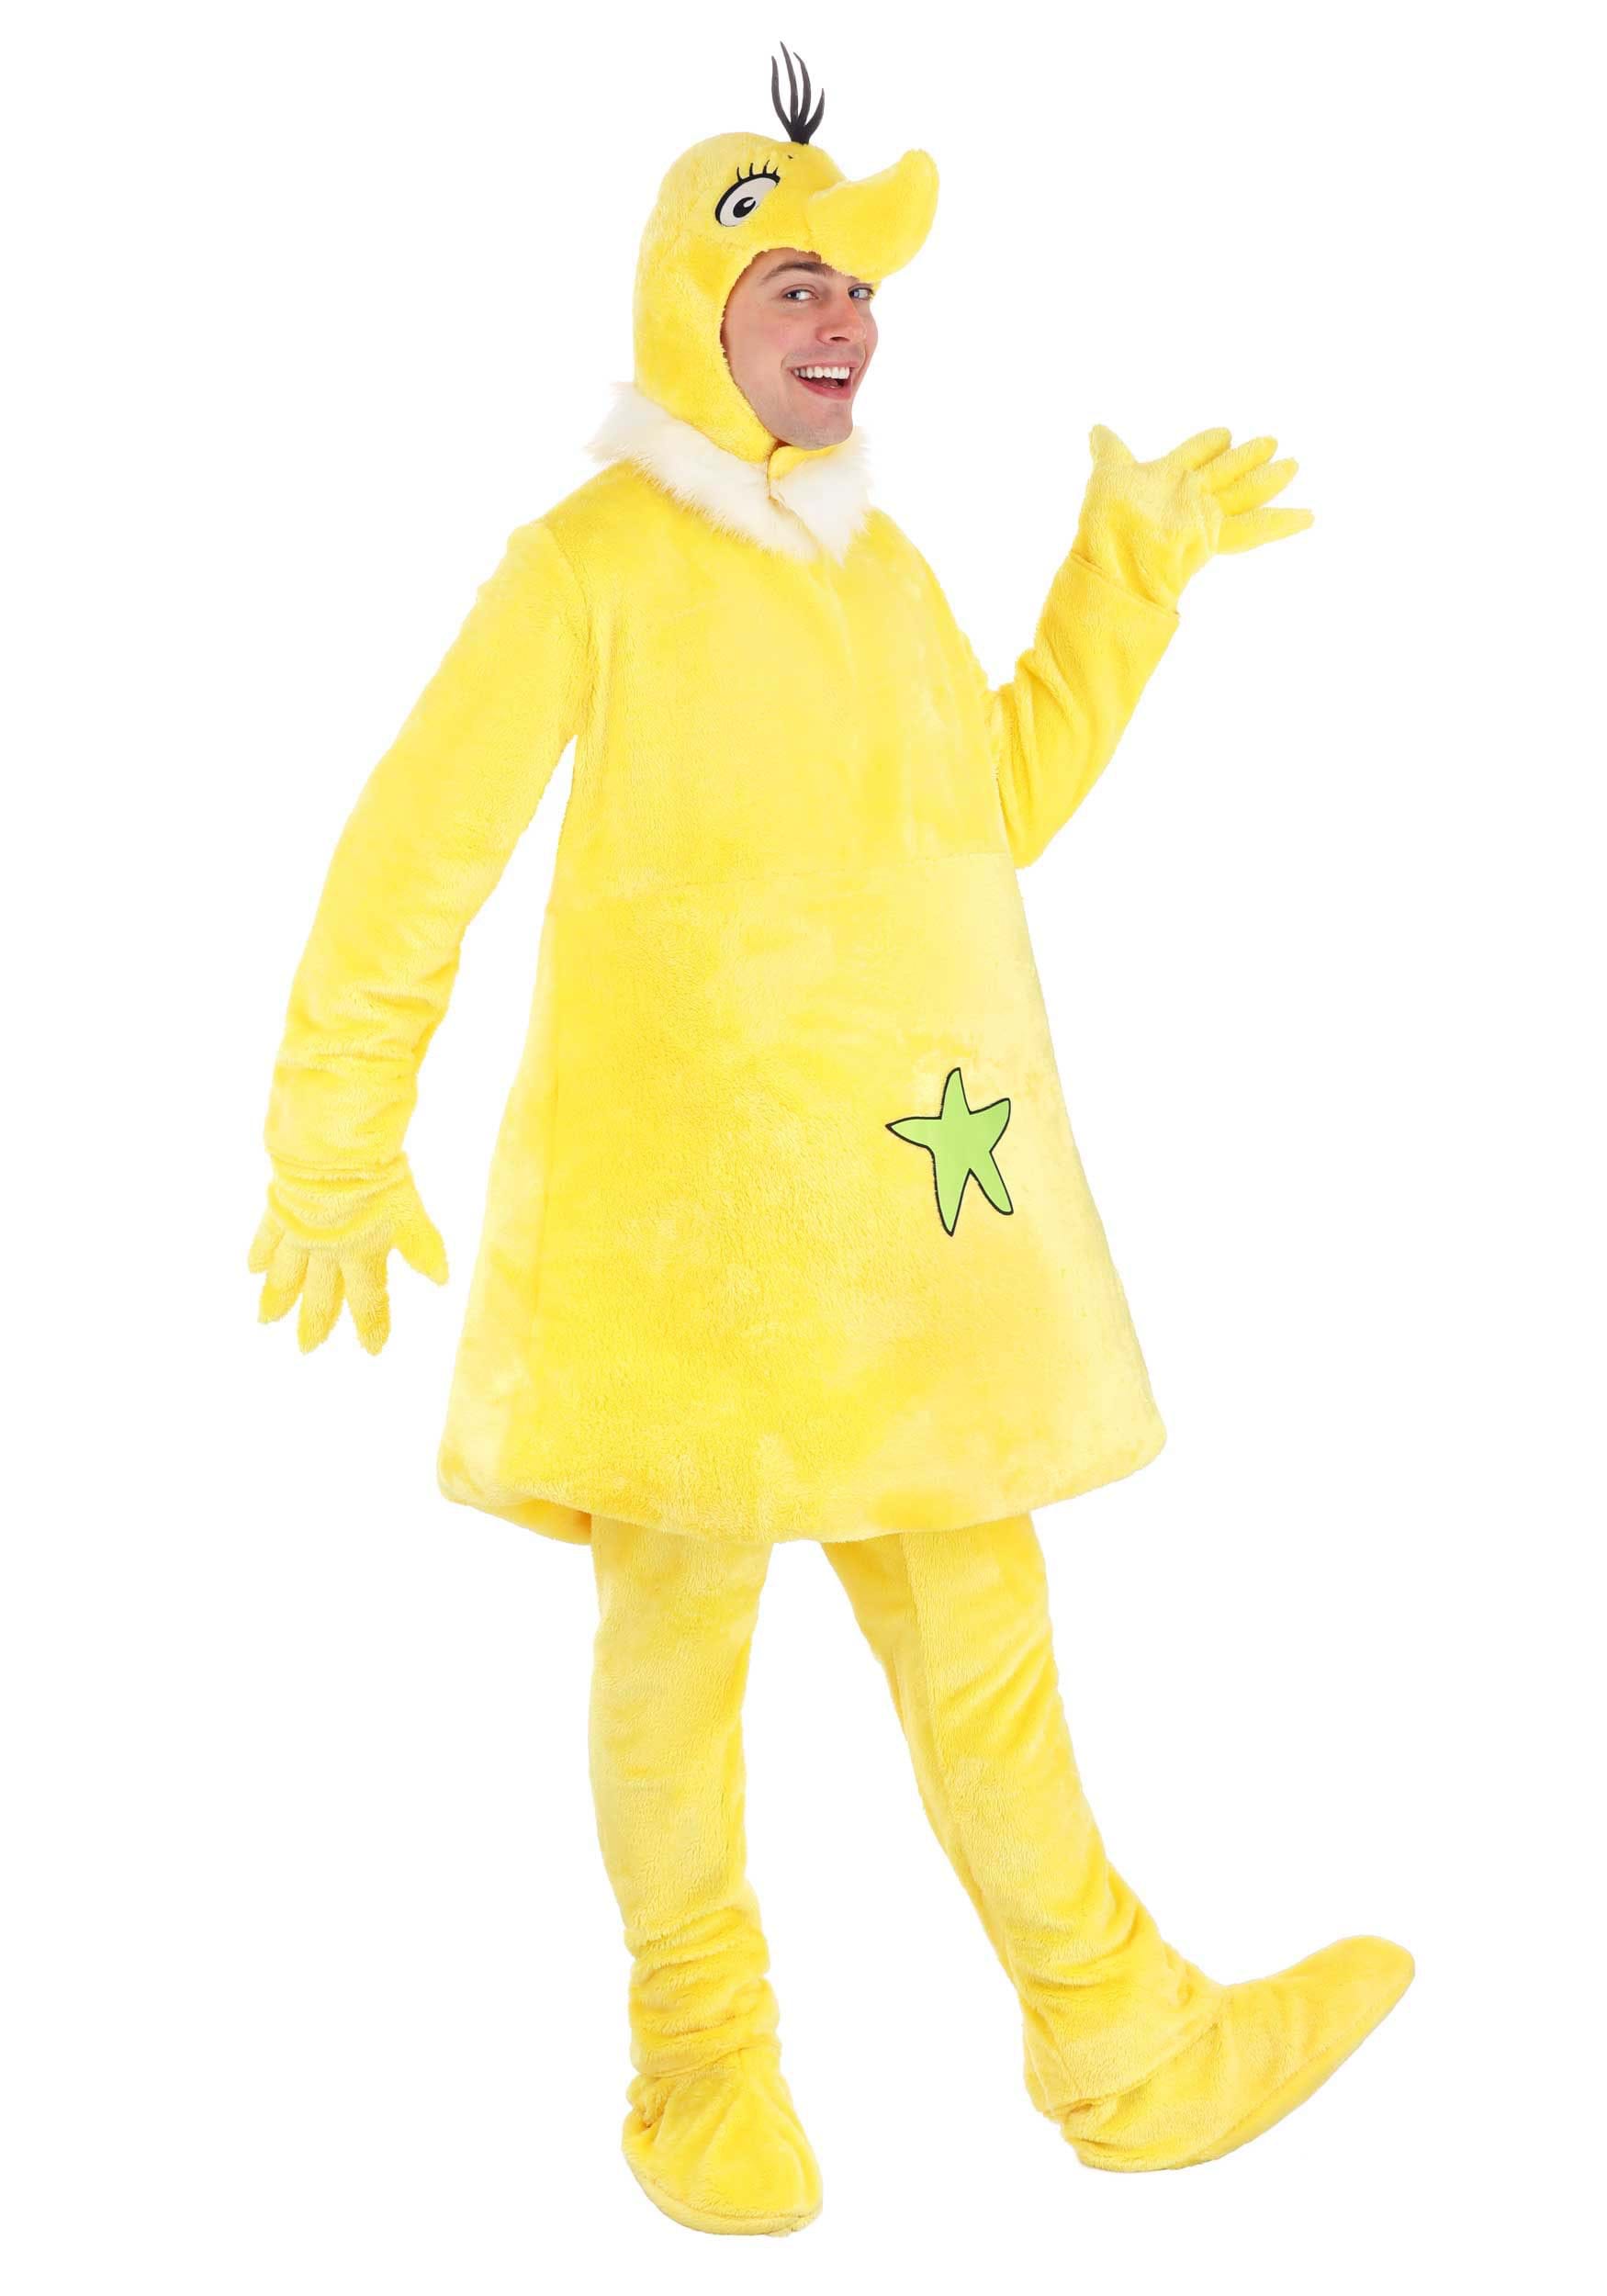 Image of Dr Seuss Star Bellied Sneetch Costume for Adults ID EL453112AD-M